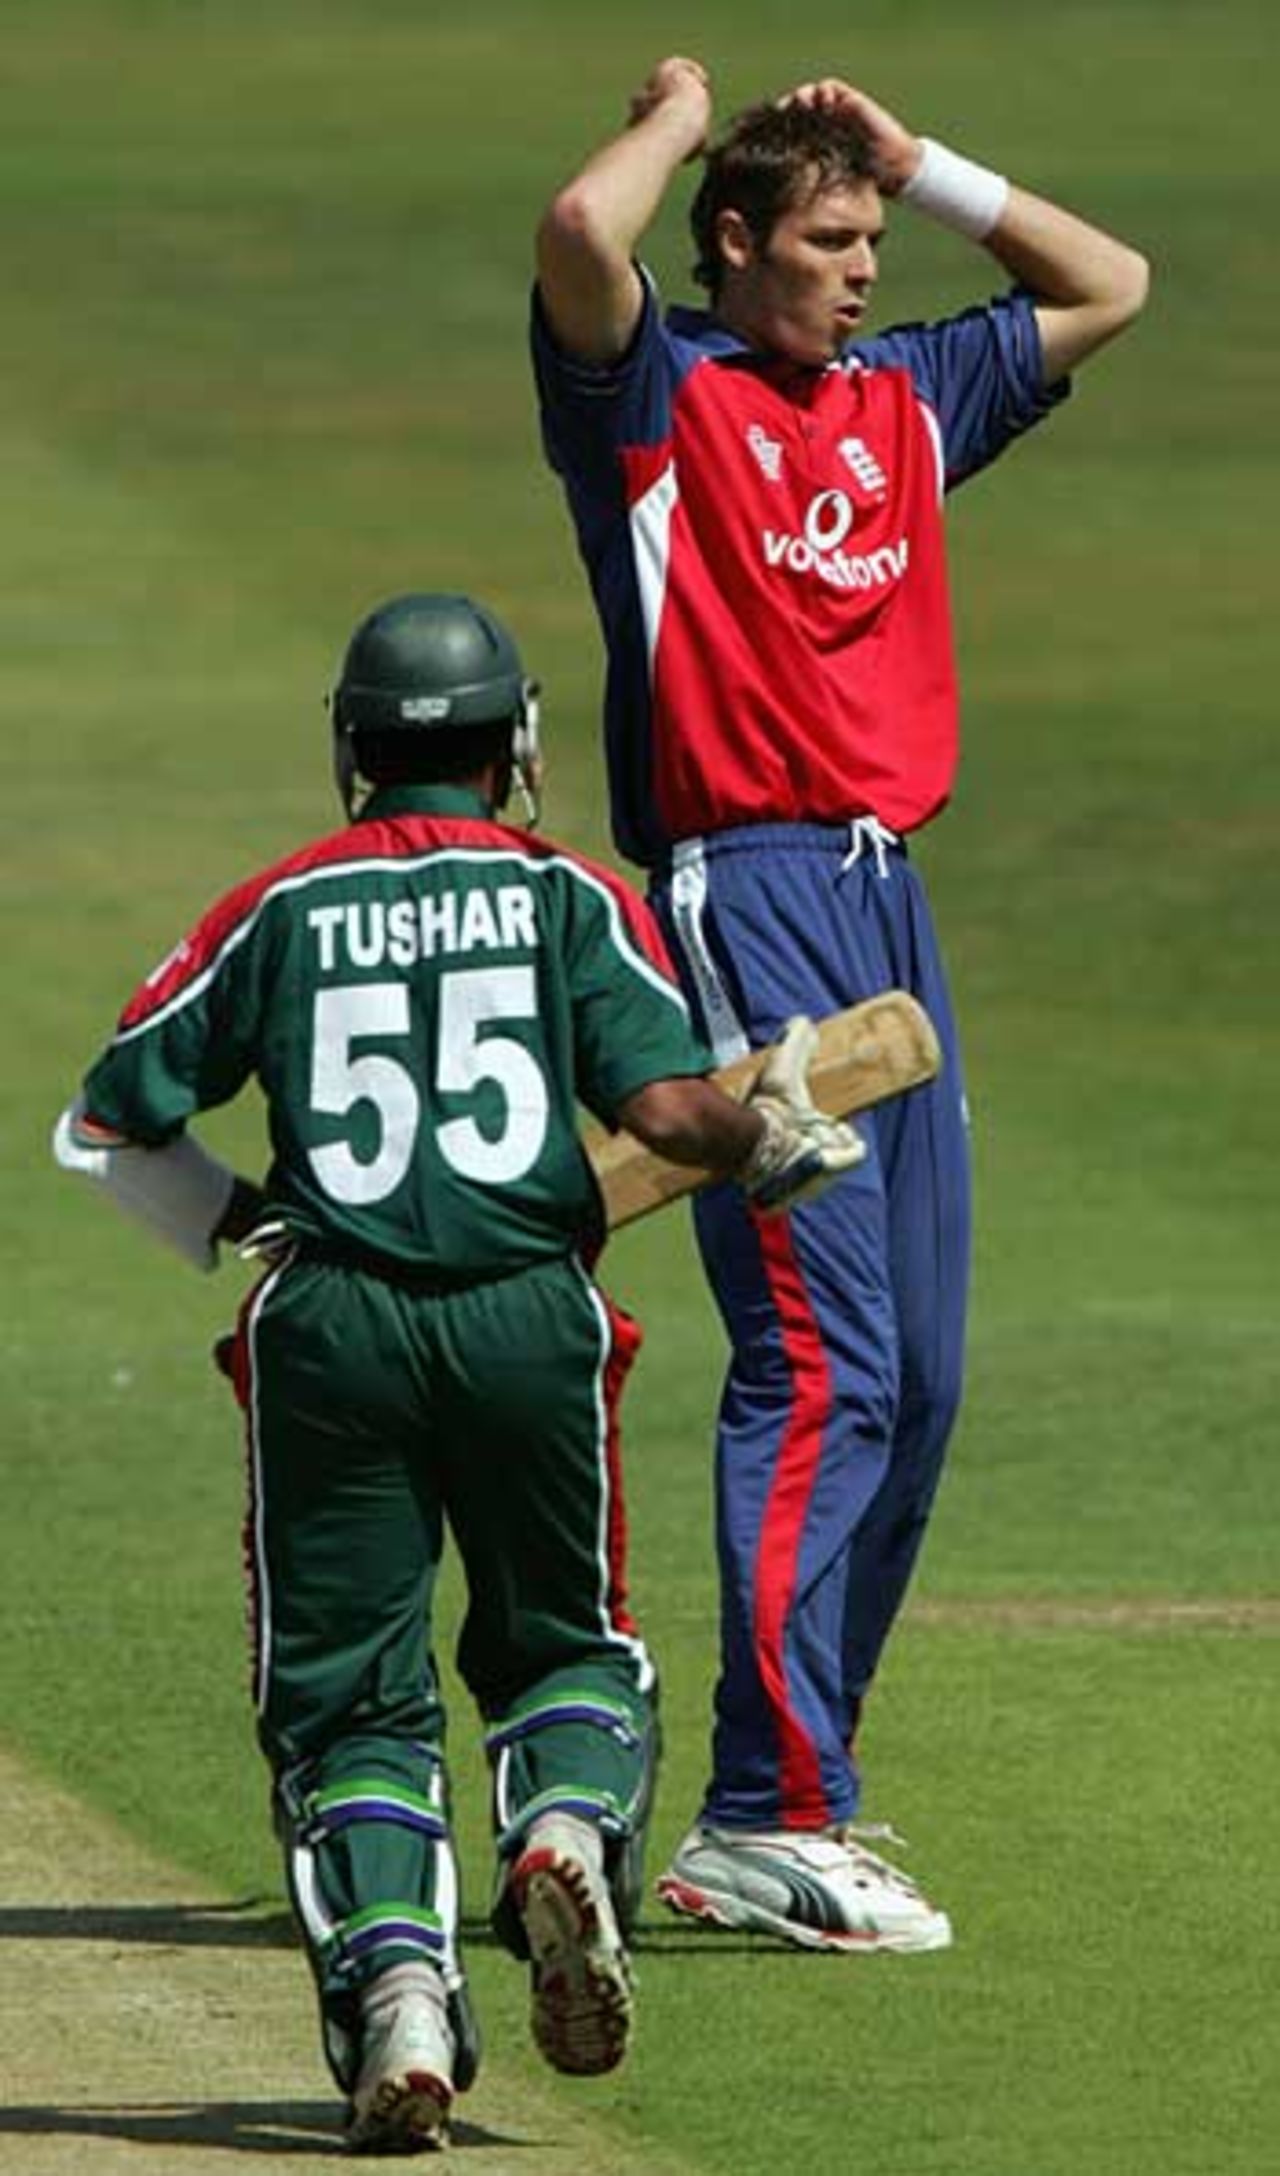 Chris Tremlett with hands on head after Tushar Imran is dropped at slip, England v Bangladesh, NatWest Series, Headingley, June 26